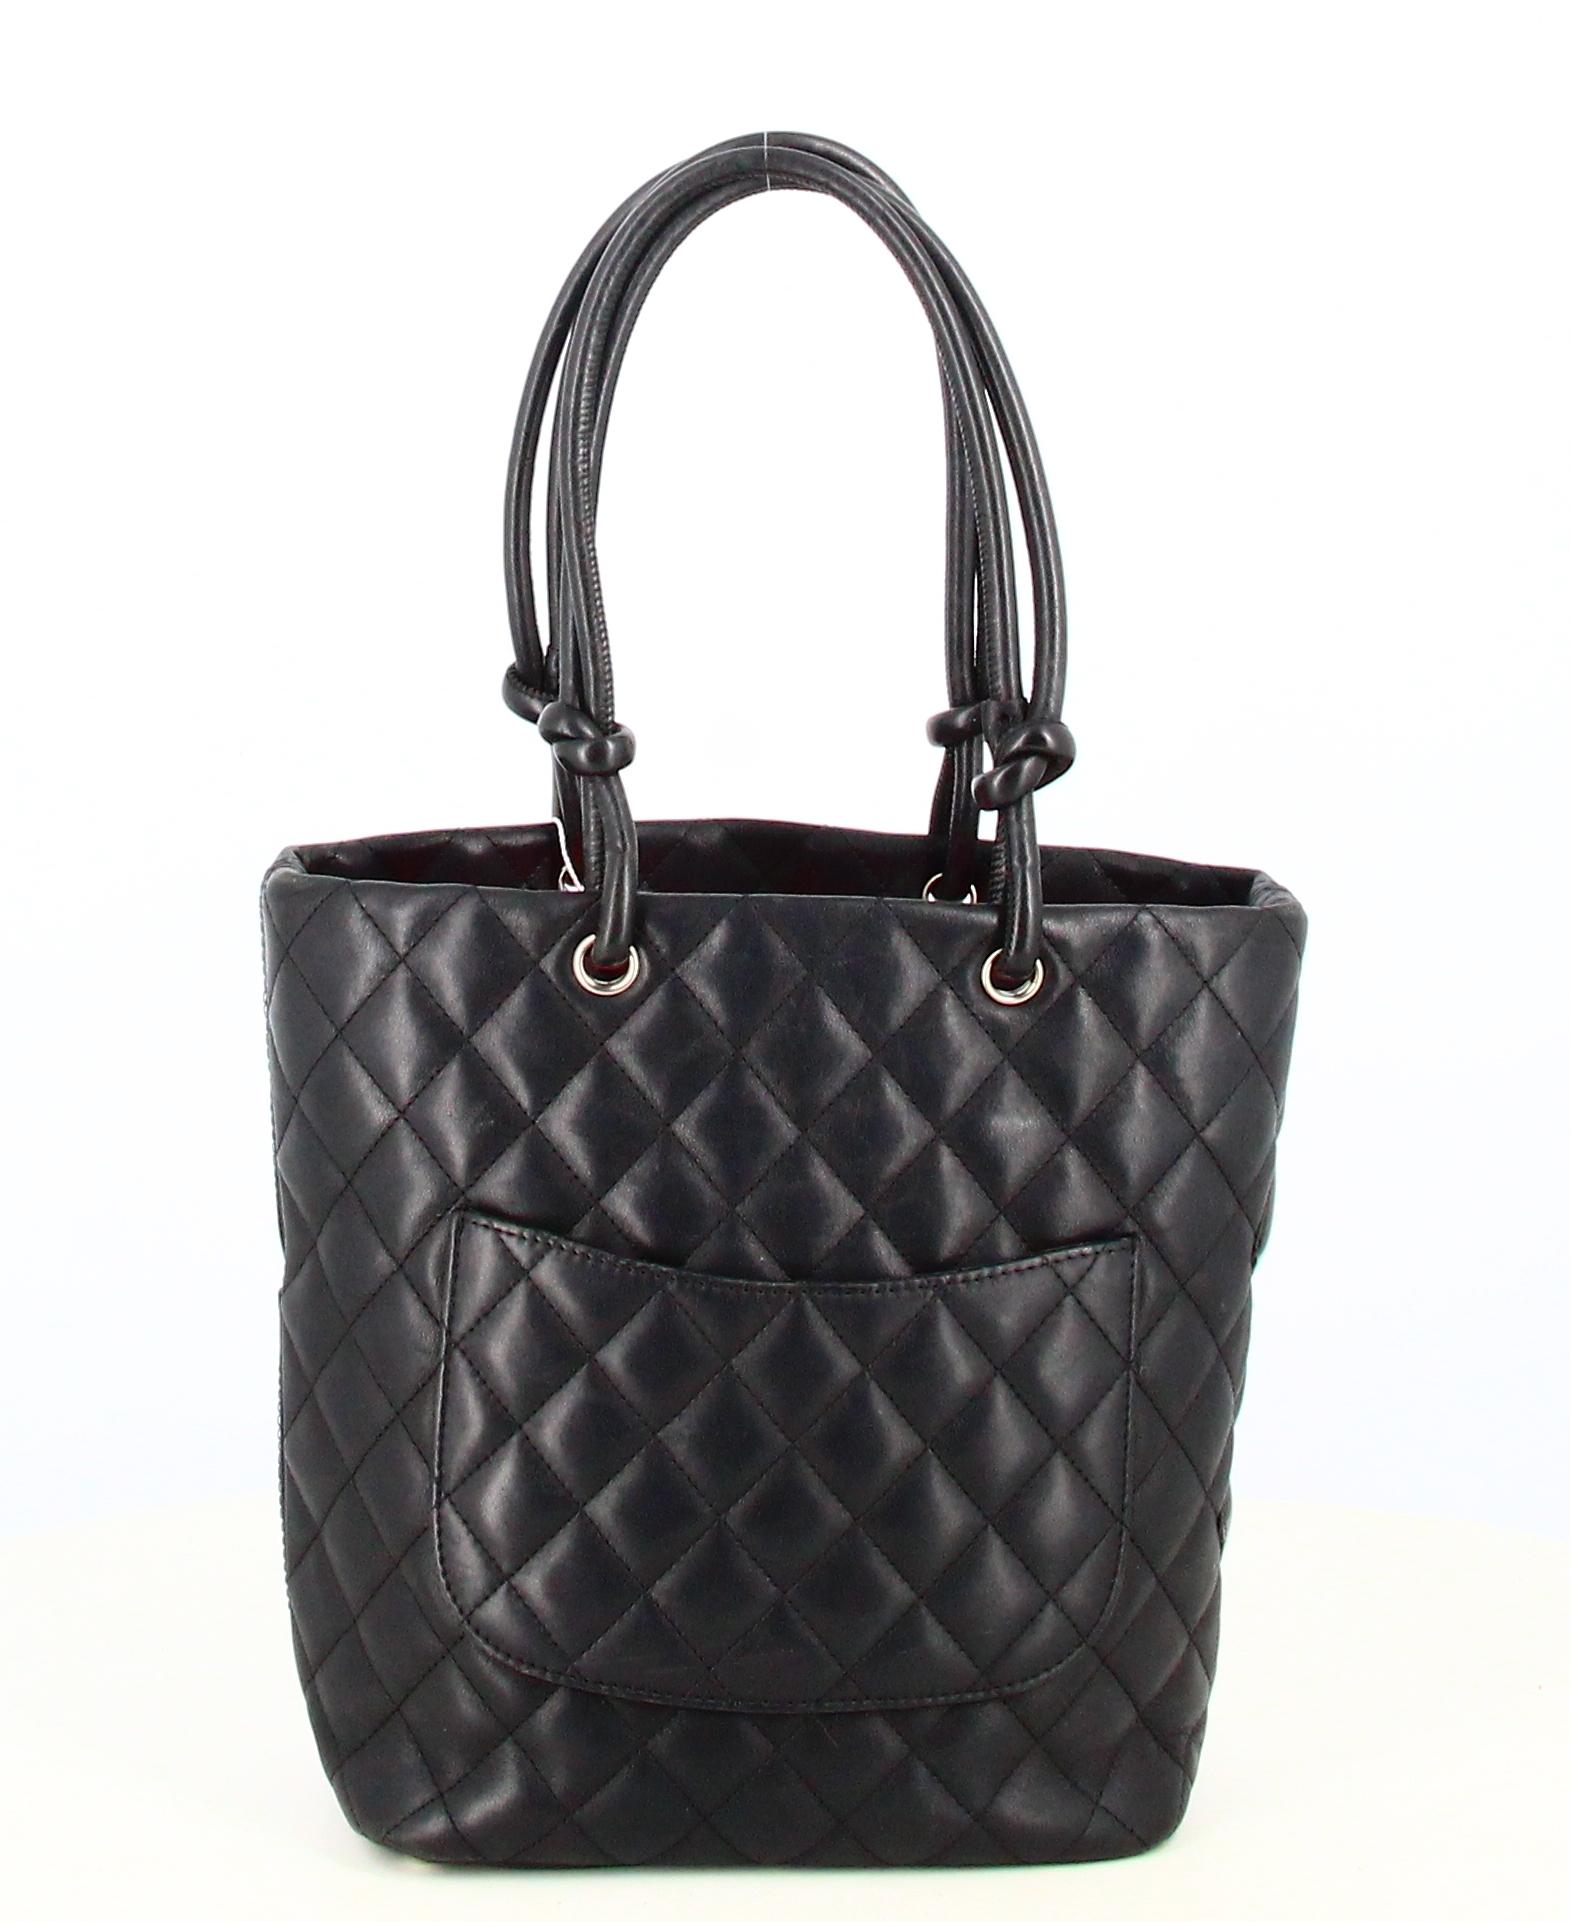 Chanel Cambon Handbag Black Quilted Leather For Sale 3